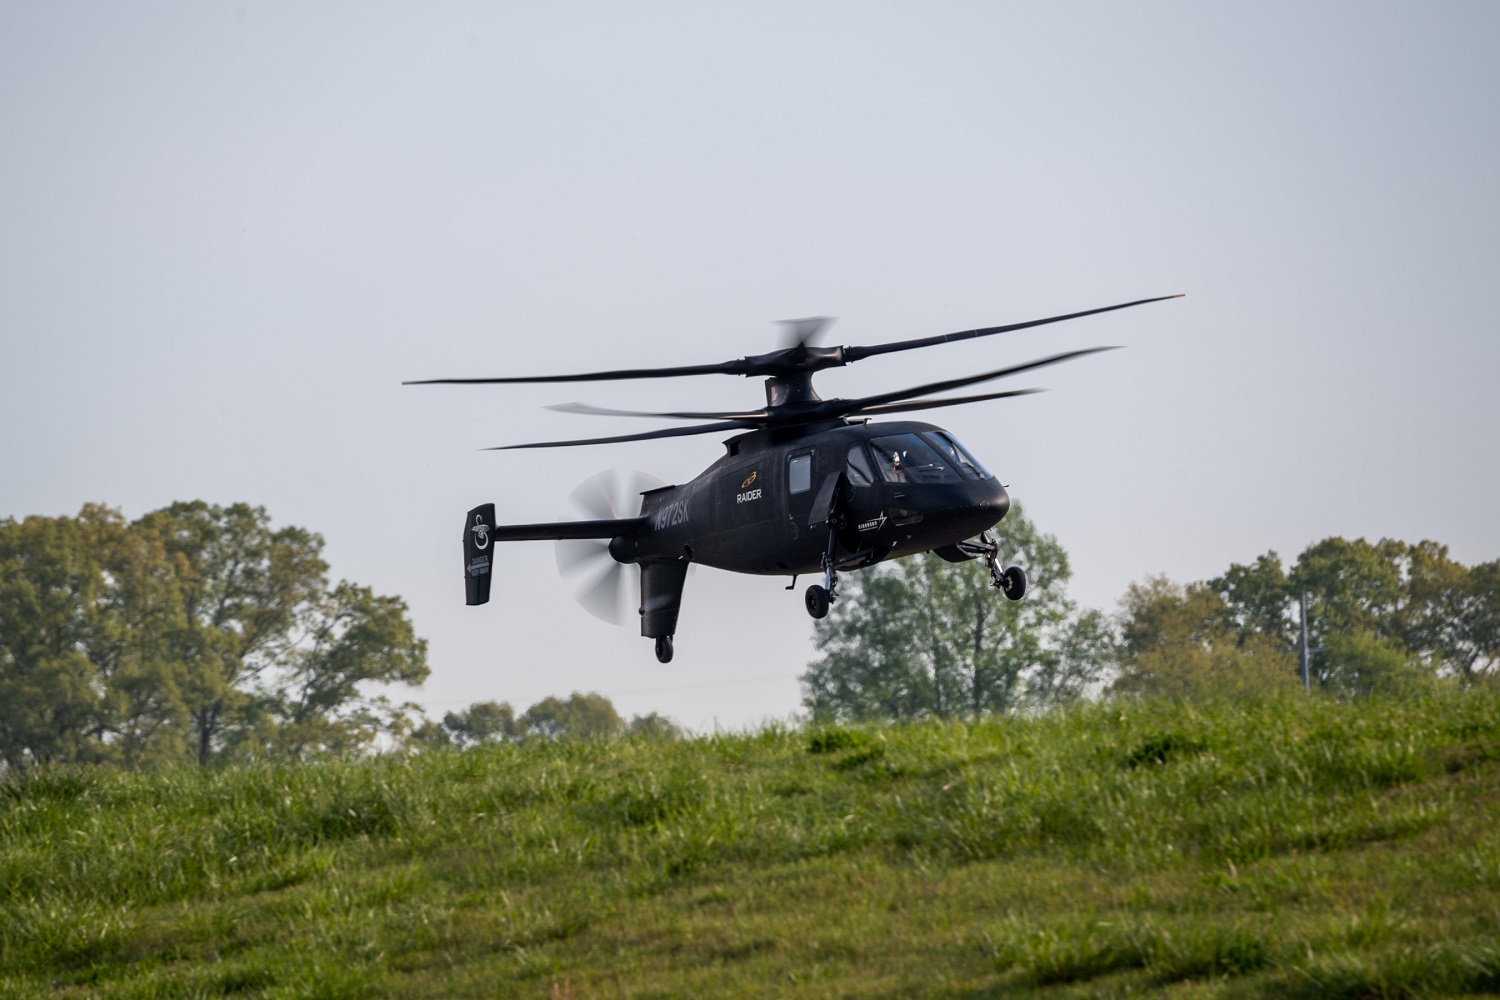 Lockheed Martin Demos Sikorsky S-97 RAIDER Raider Helicopter for US Army